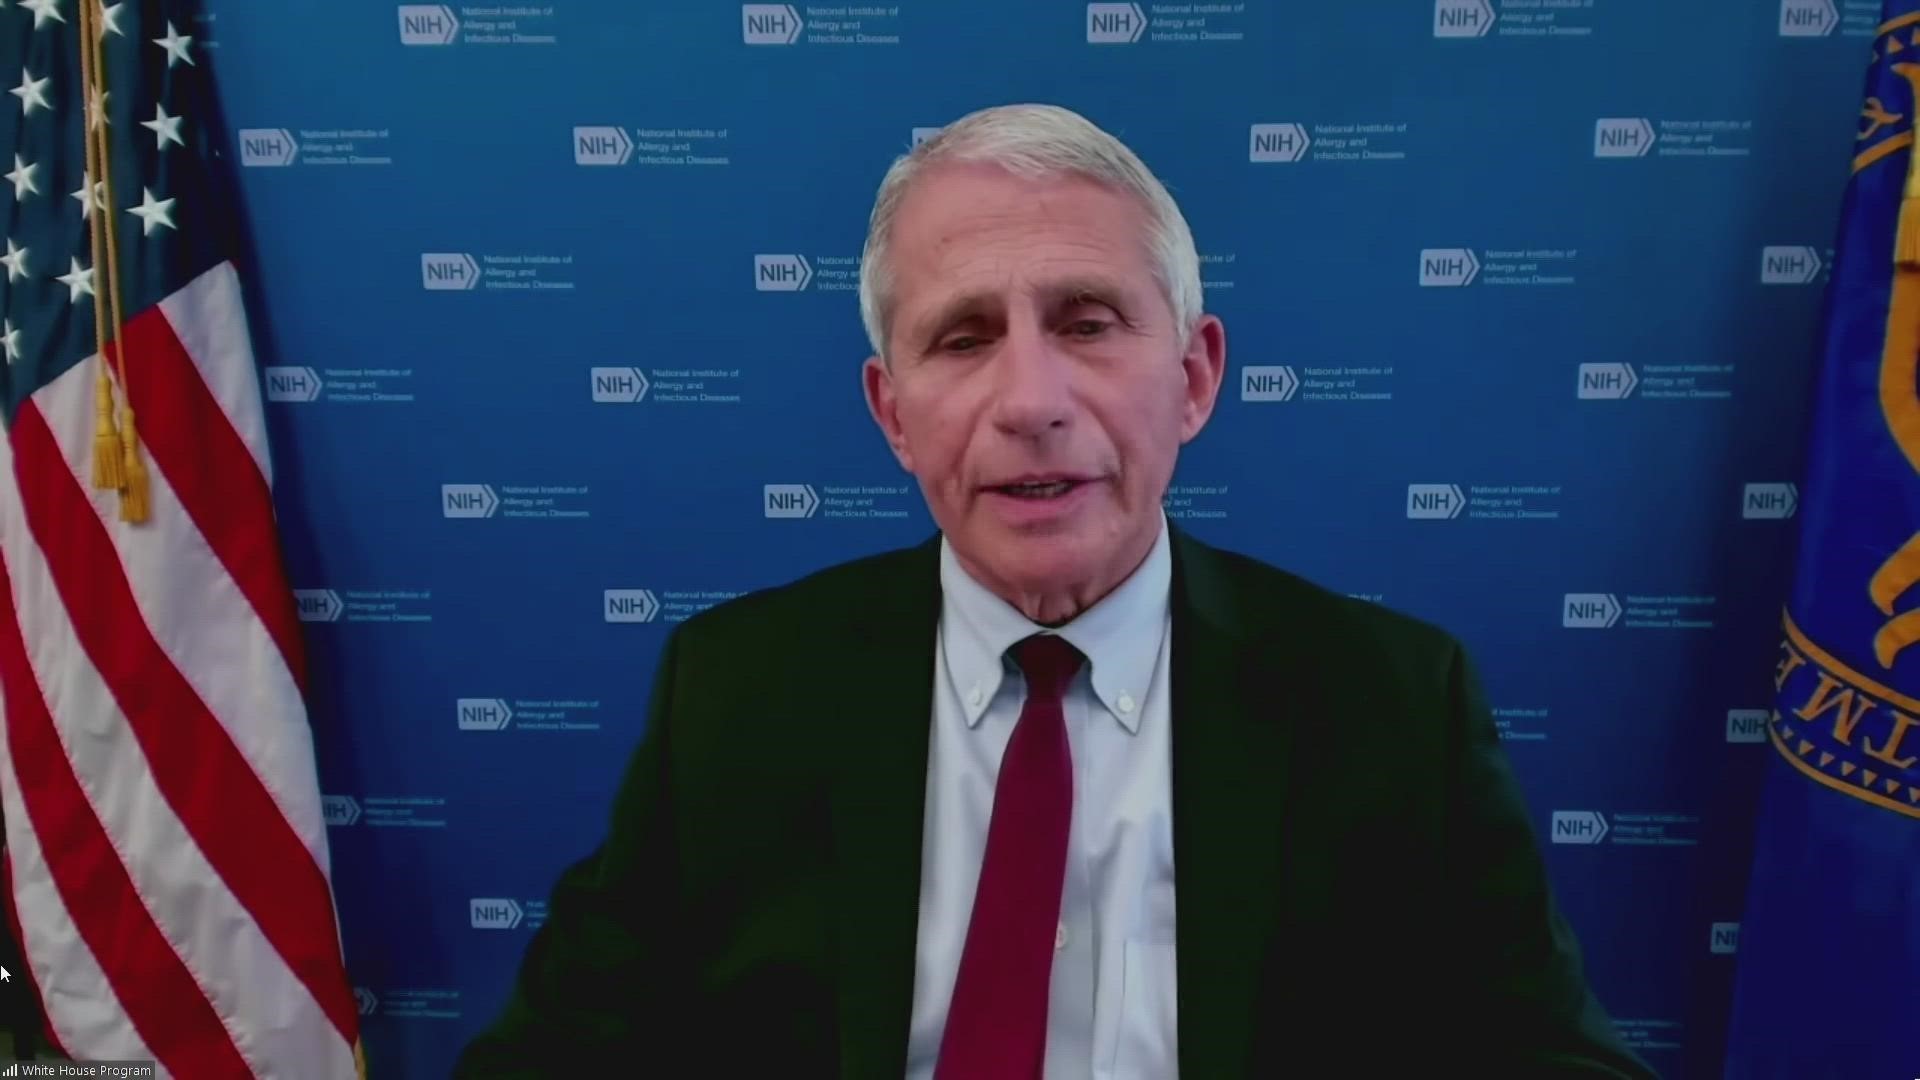 Dr. Anthony Fauci highlights how COVID-19 vaccines protect Americans against the spreading delta variant.